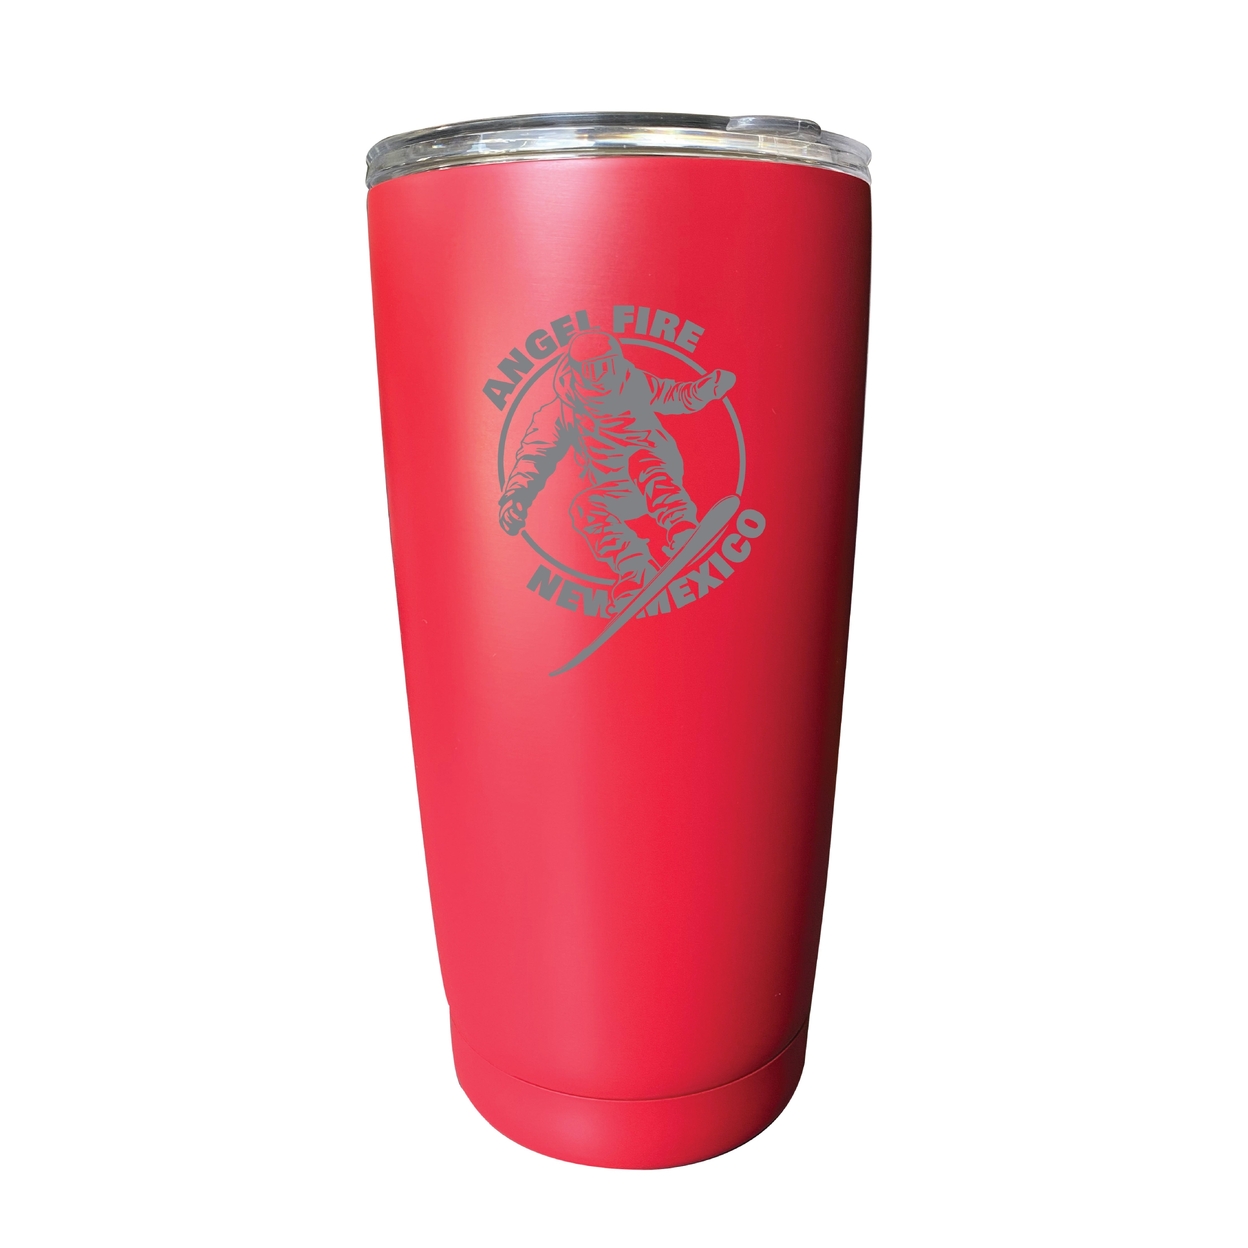 Angel Fire New Mexico Souvenir 16 Oz Engraved Stainless Steel Insulated Tumbler - Pink,,Single Unit